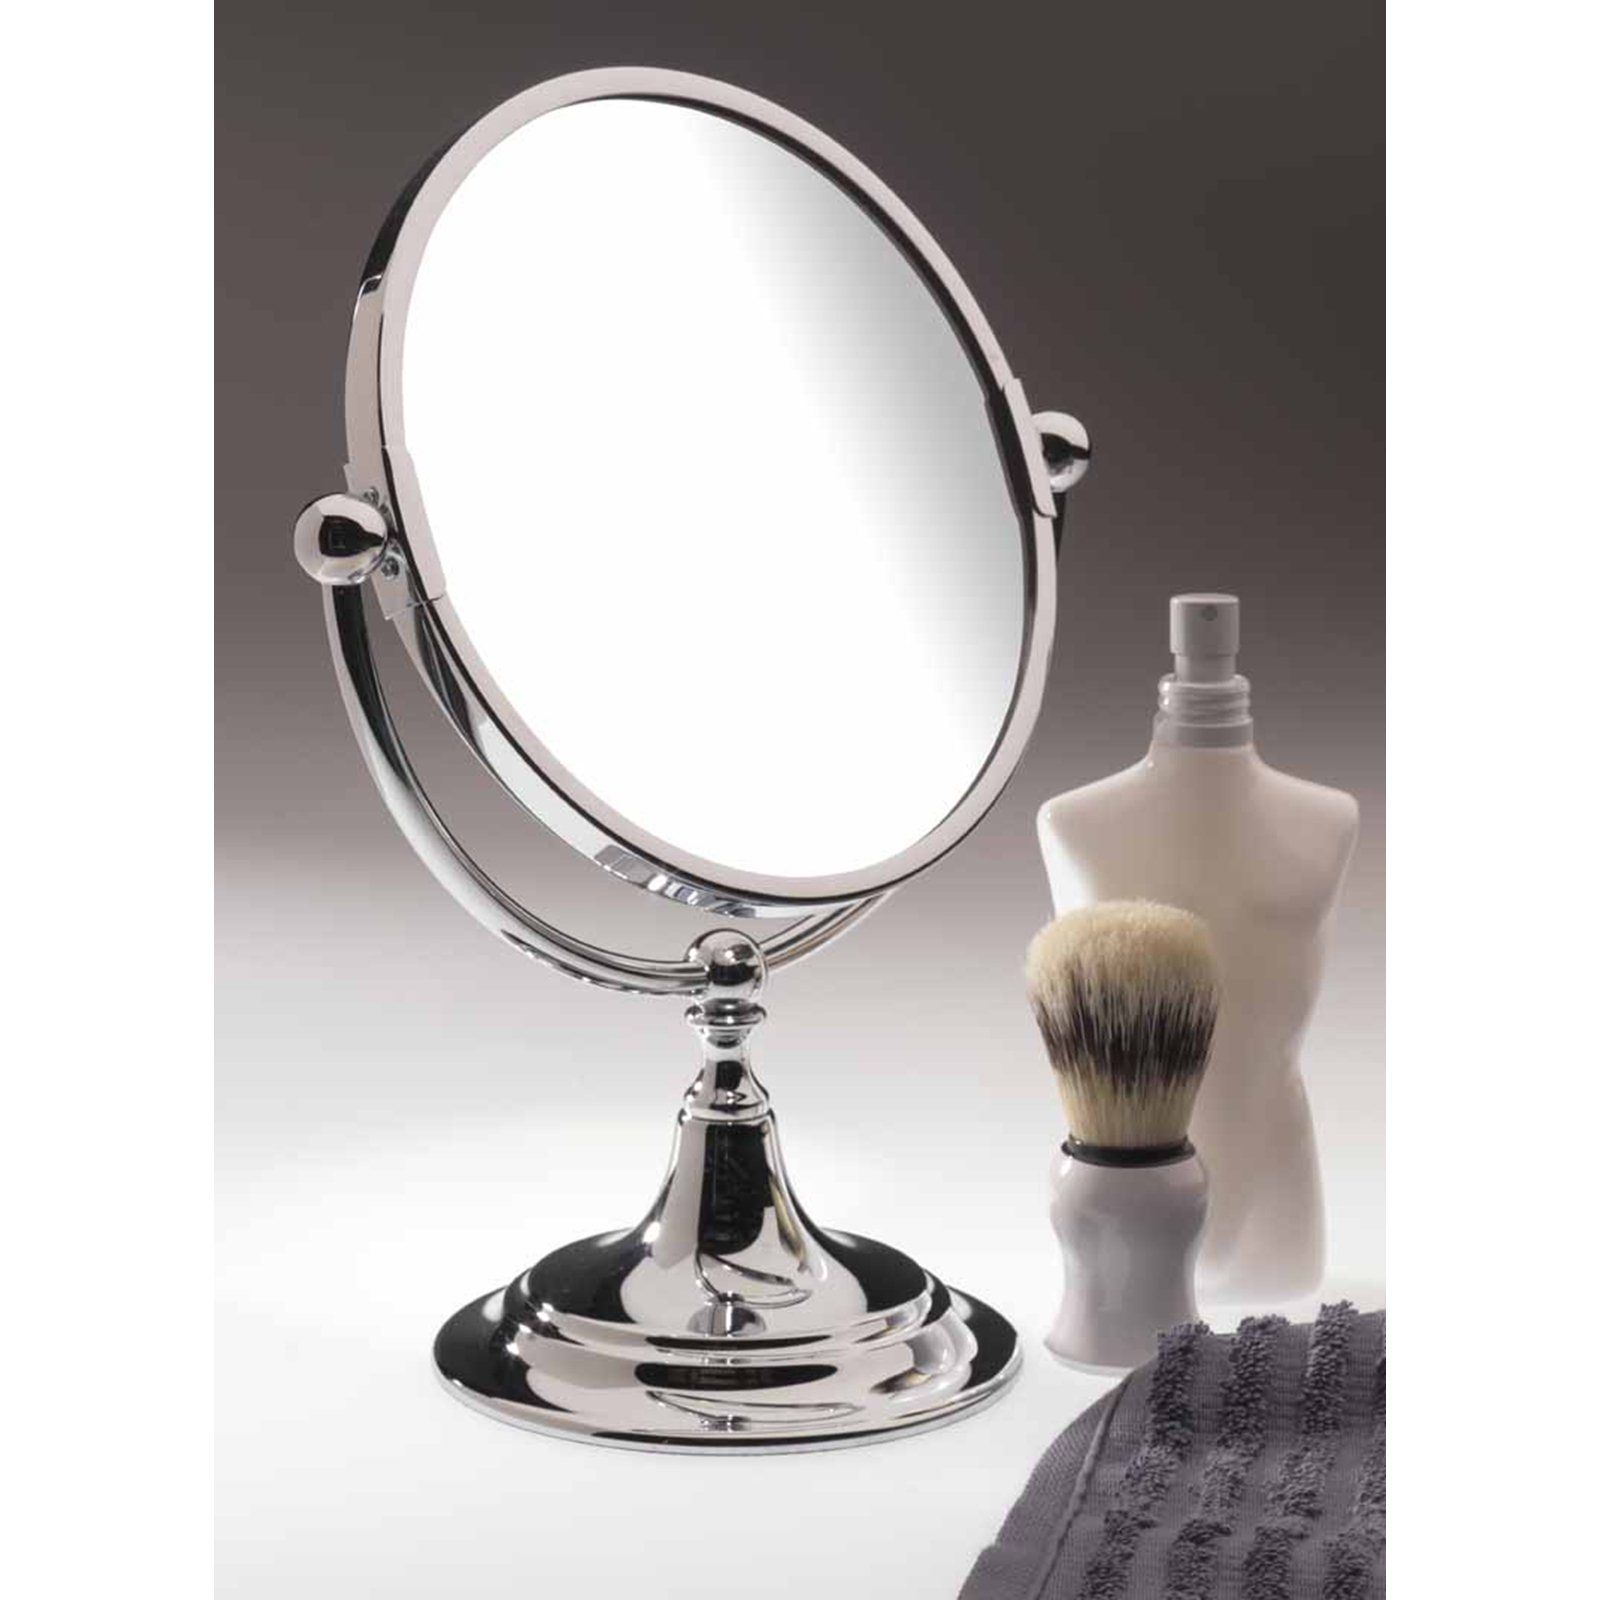 Bathroom Small Make Up Mirror Intended For Single Sided Chrome Makeup Stand Mirrors (View 2 of 15)